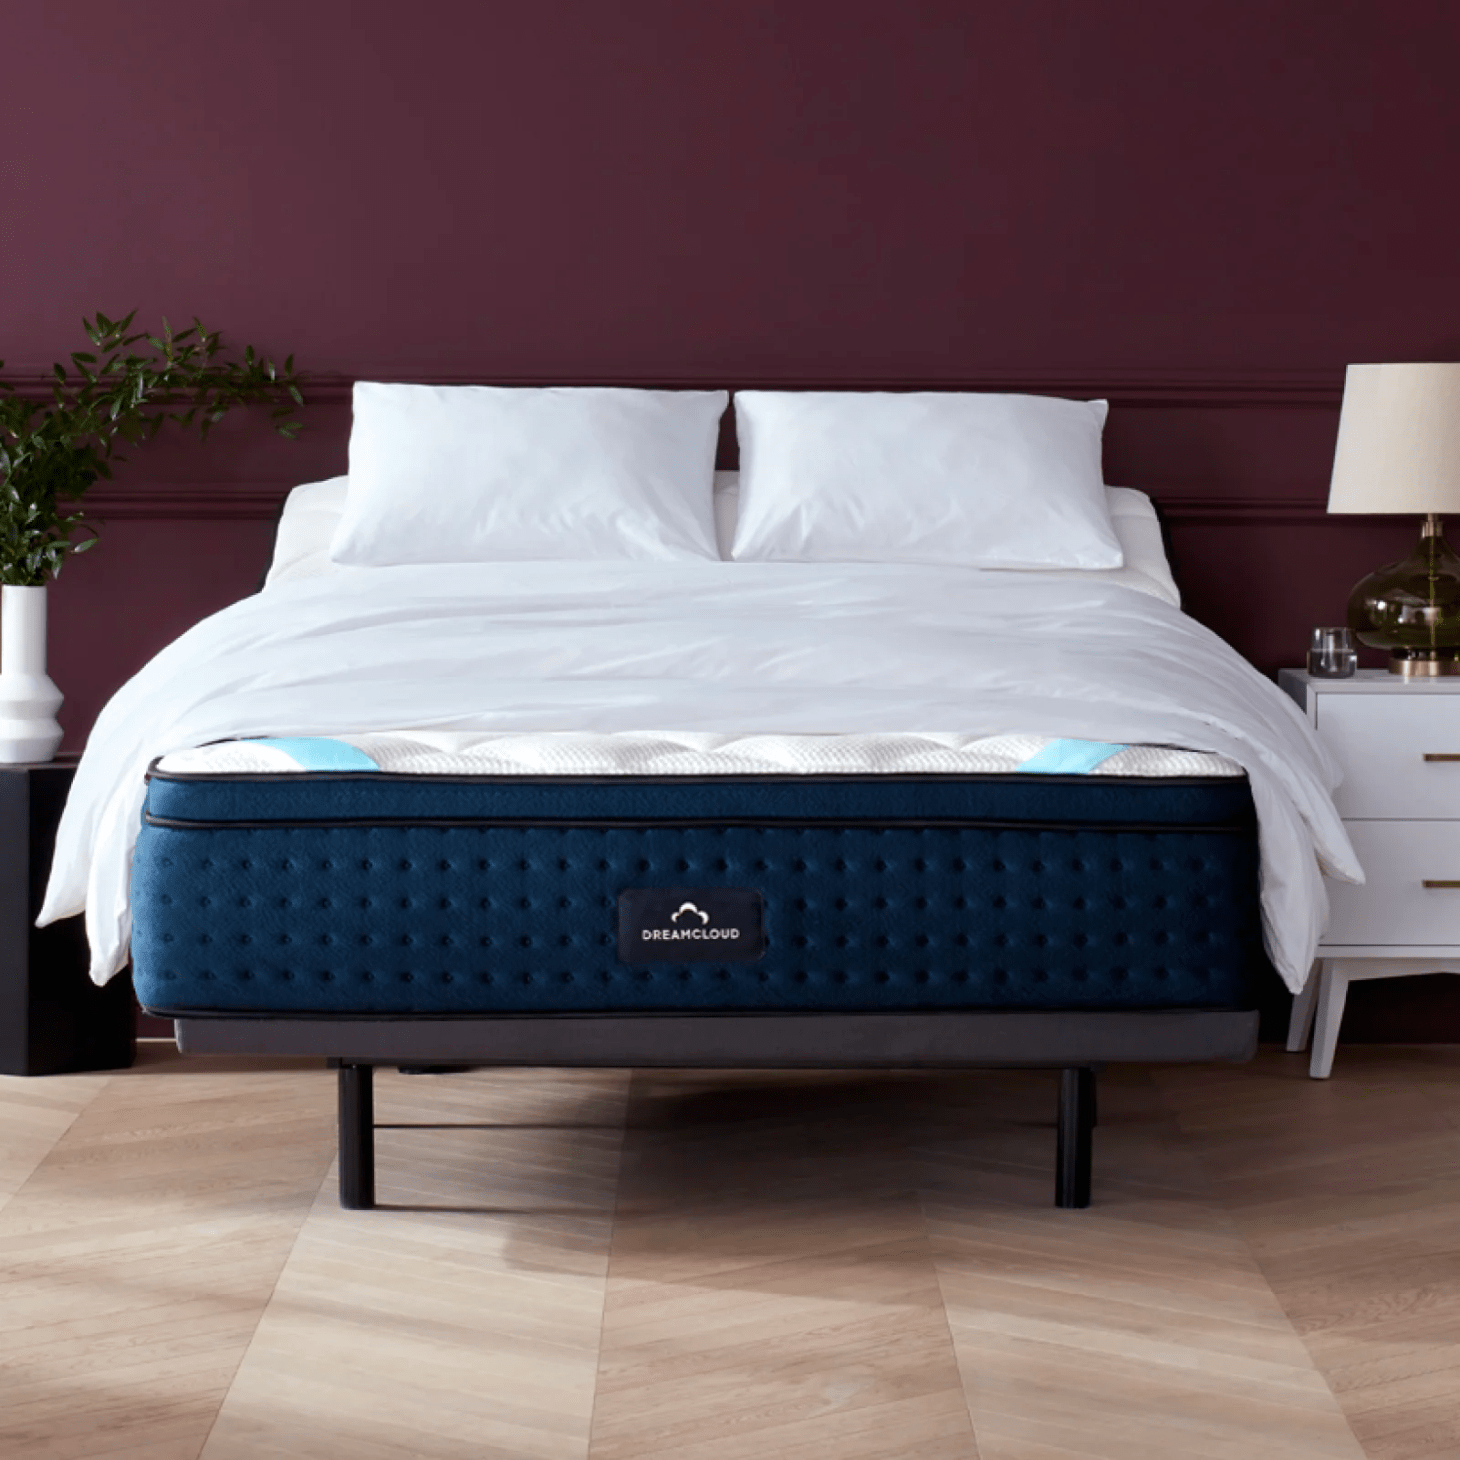 dreamcloud mattress, on sale for 4th of july